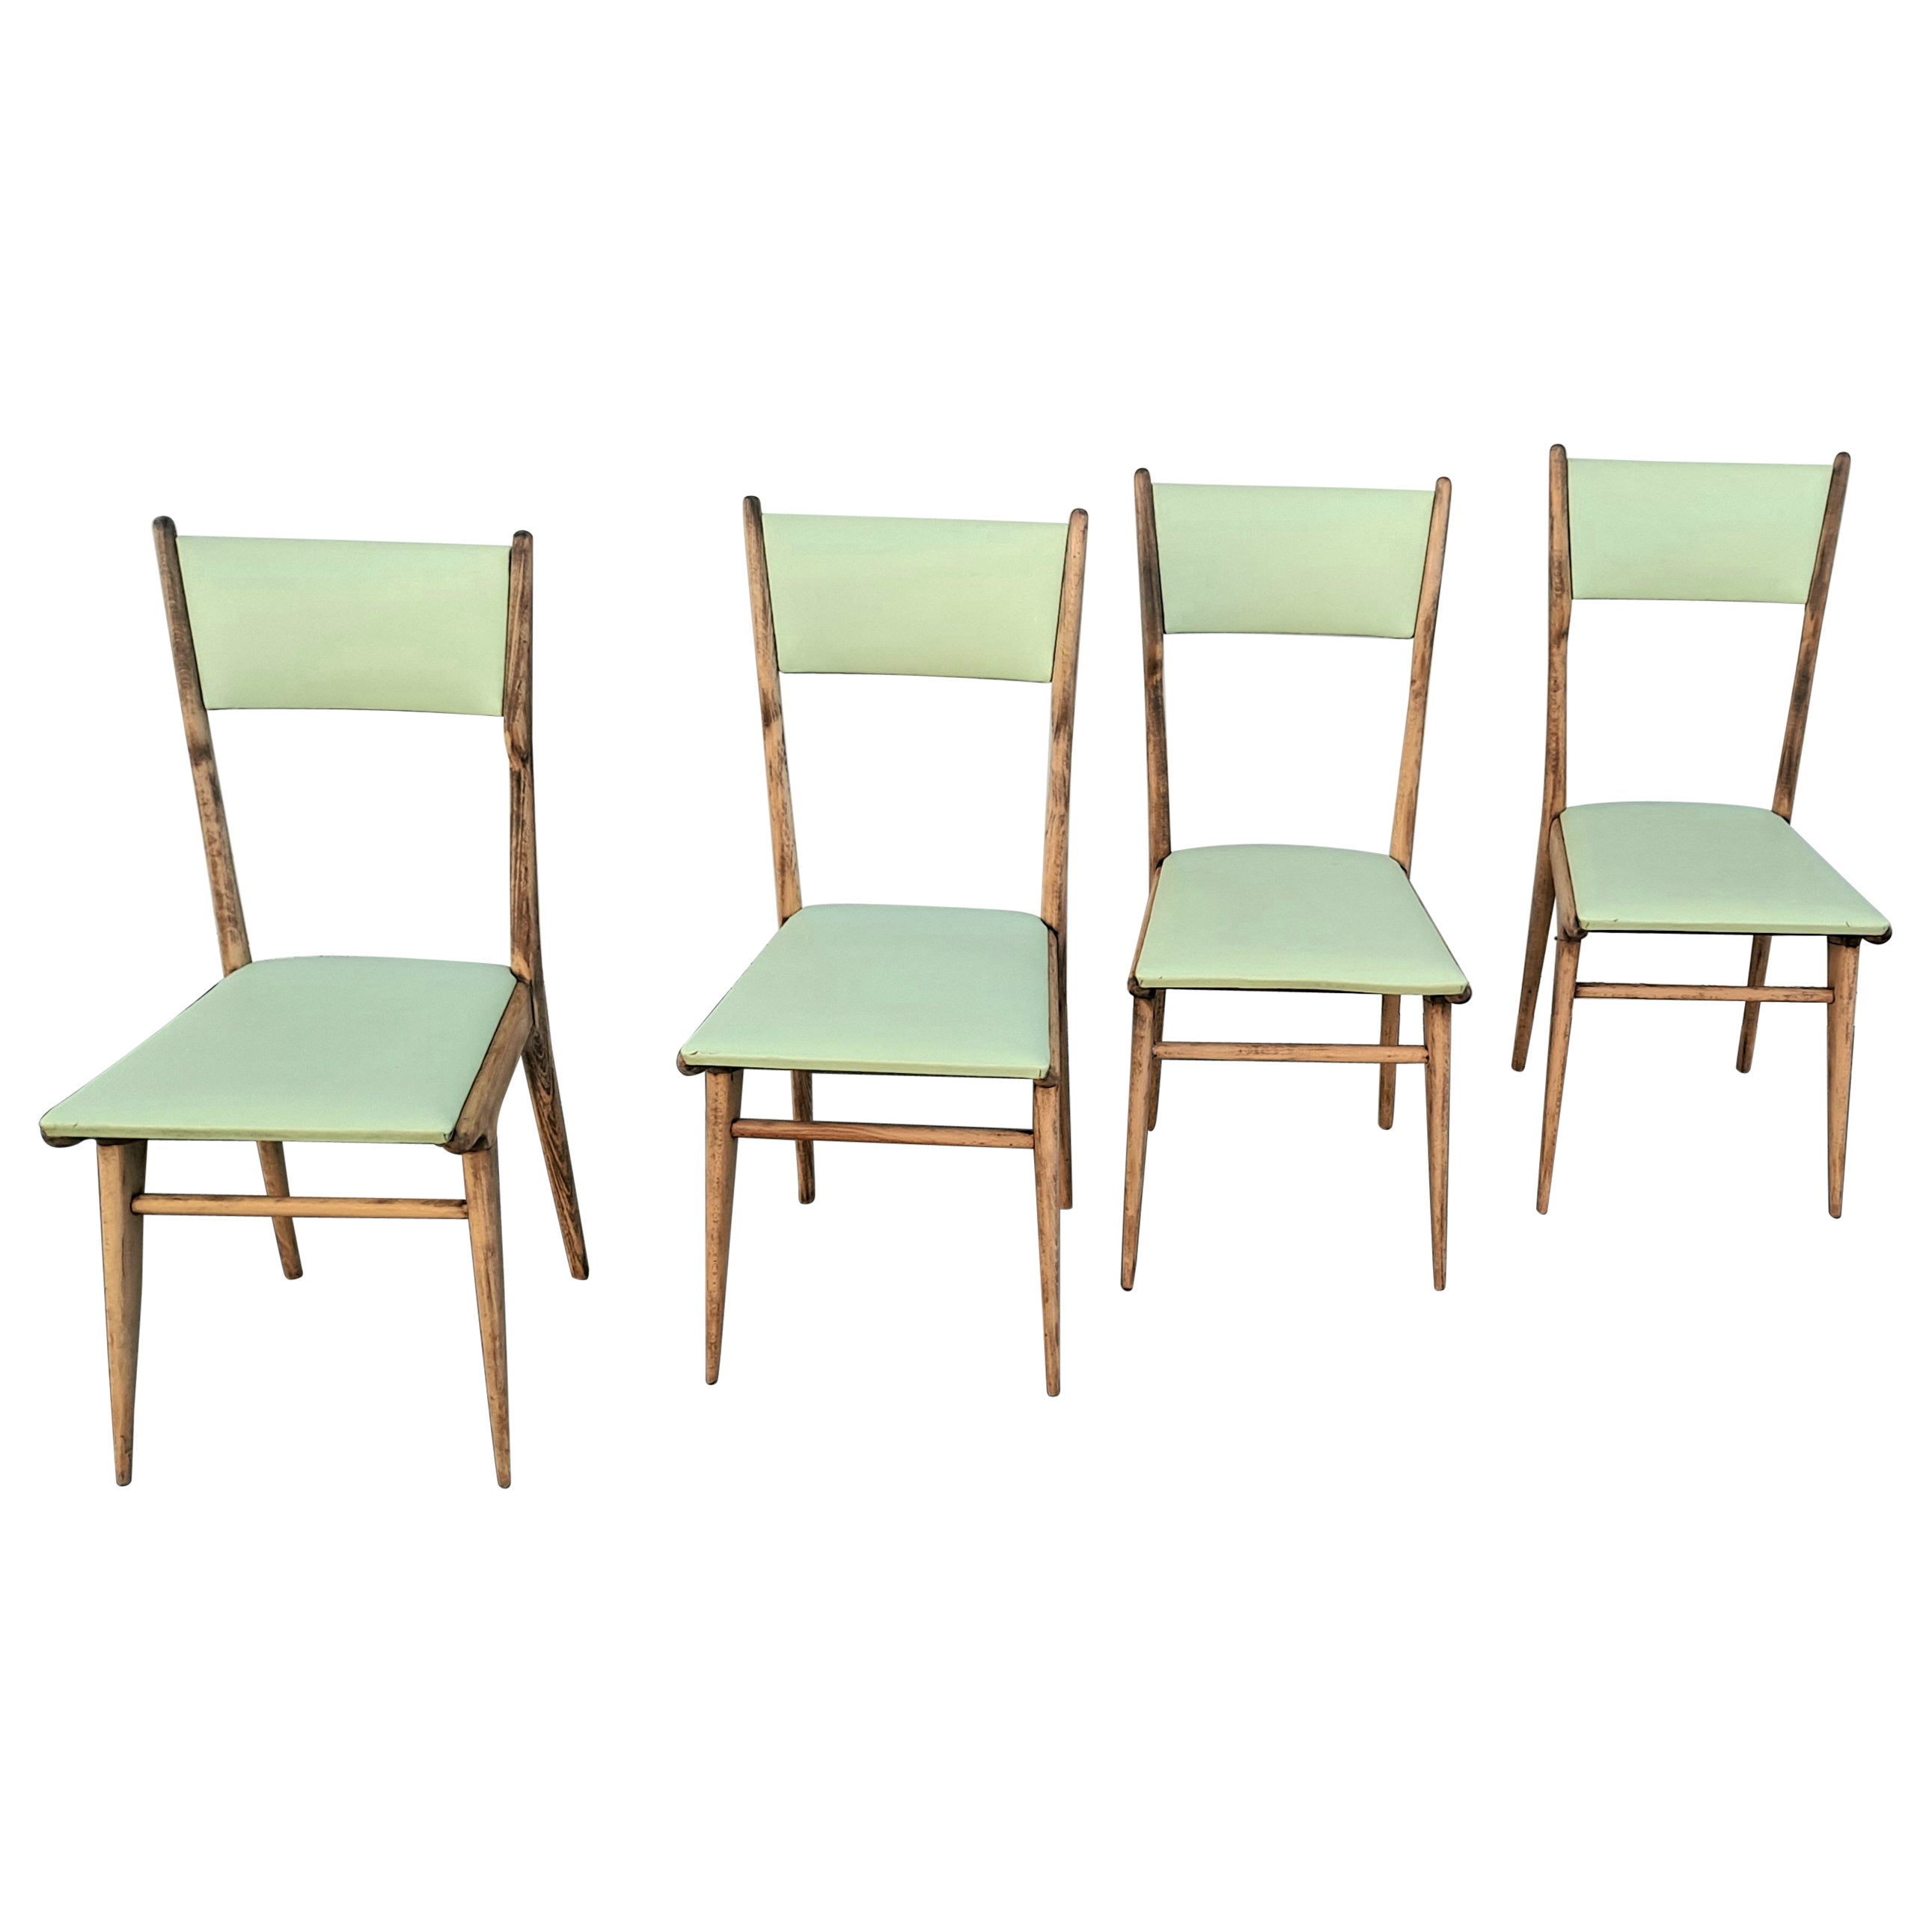 Italian Midcentury Ding Room Chairs For Sale